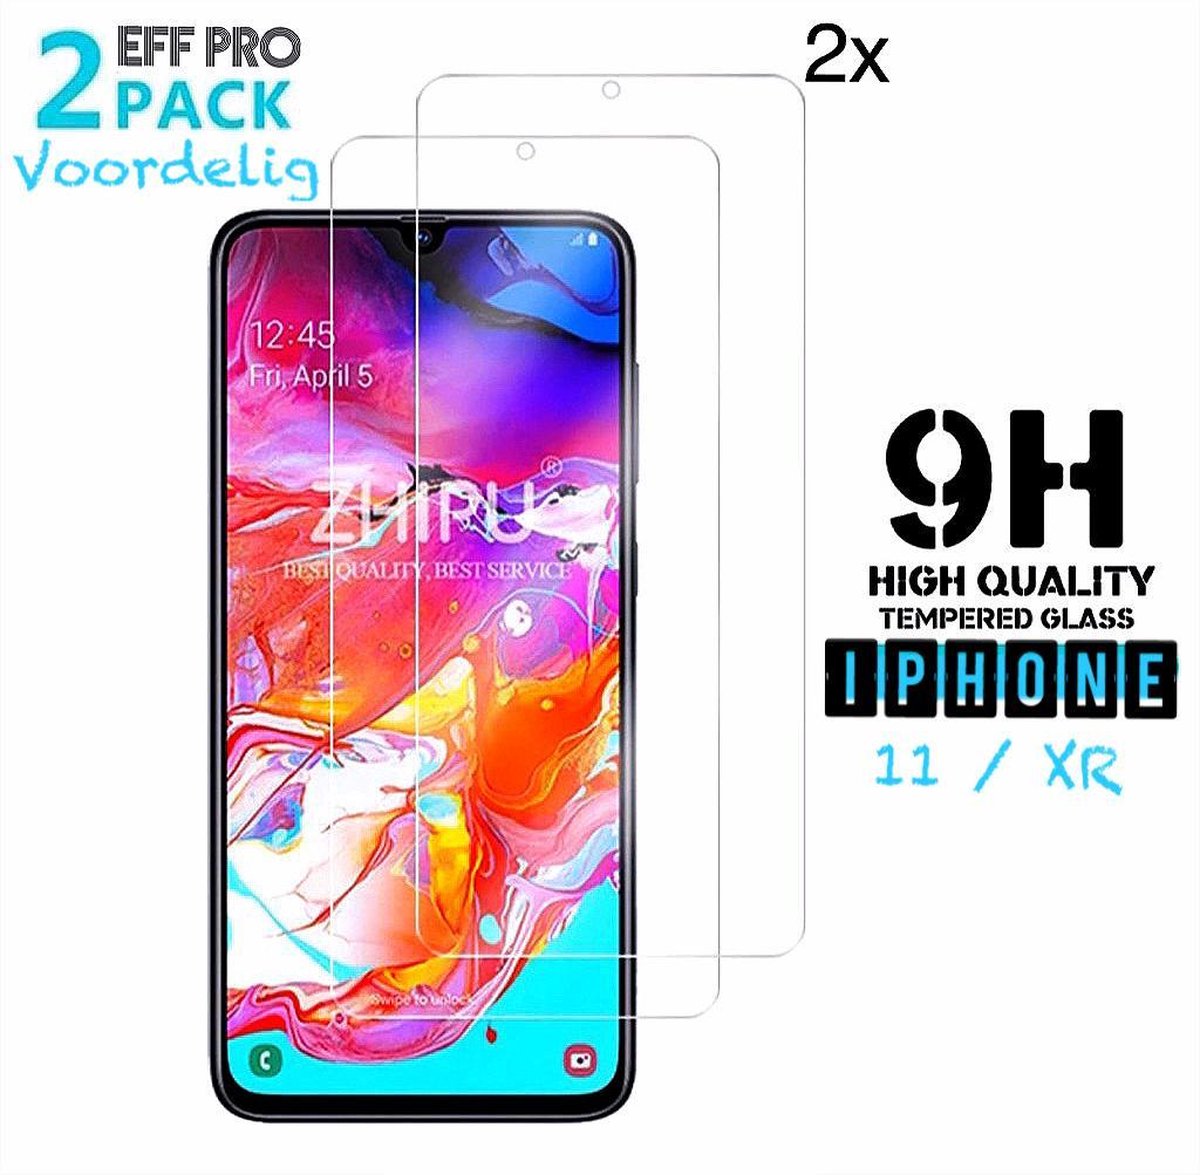 iPhone X Hoesje Transparant / iPhone XS Hoesje Transparant (Siliconen TPU Soft Case) + Screenprotector Tempered Glass - Eff Pro